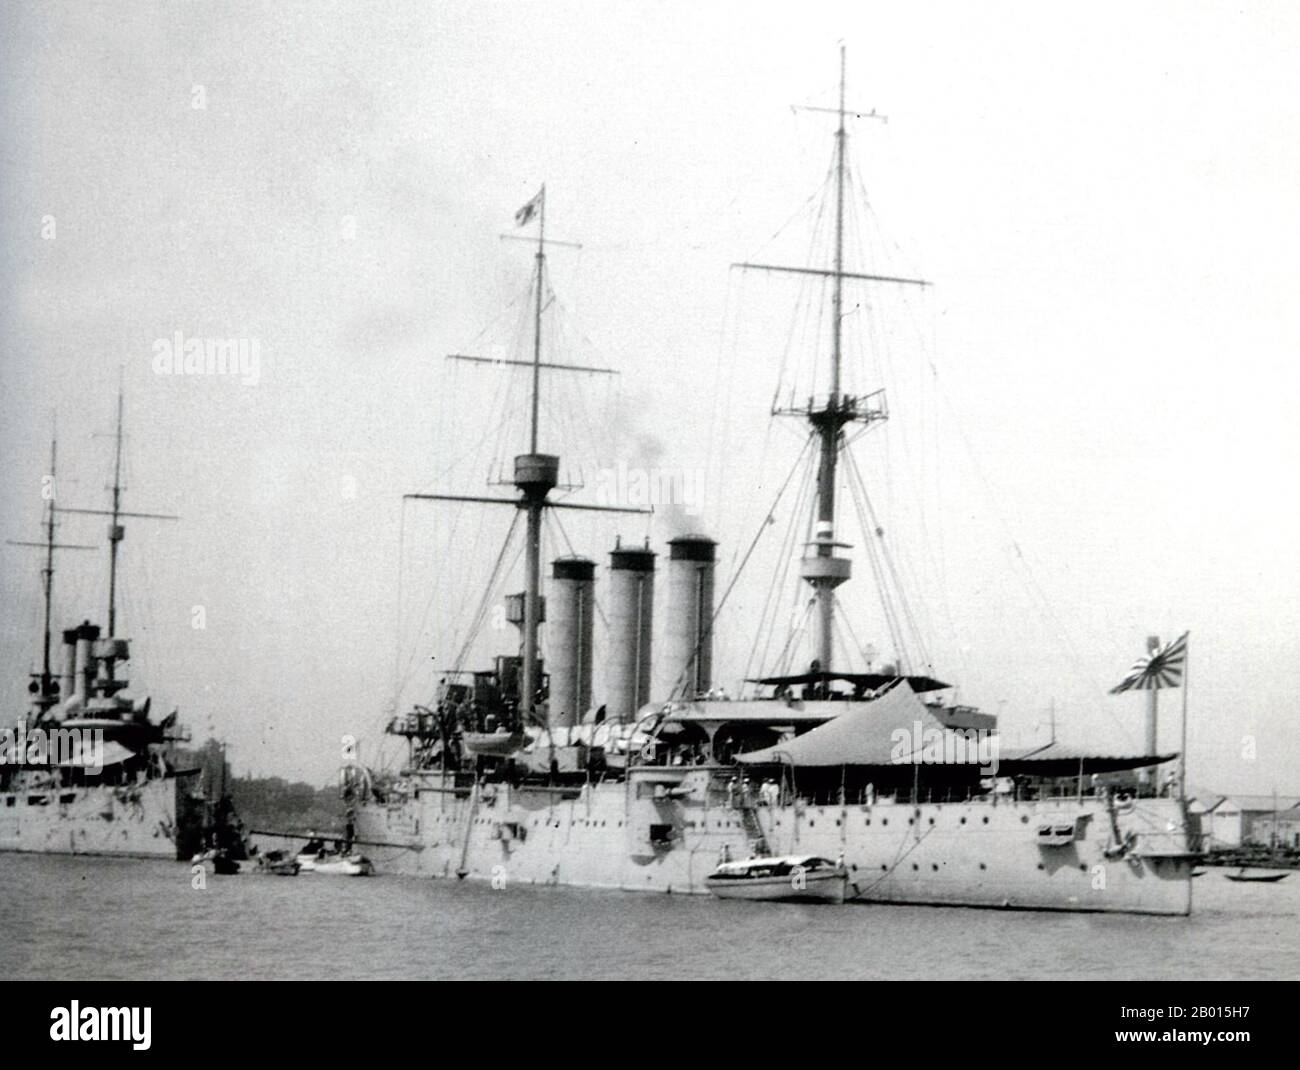 China: The Japanese armoured cruiser Izumo anchored in Shanghai, 1932.  The Izumo was an armored cruiser of the Imperial Japanese Navy. The Izumo was named after Izumo Province, an ancient province of Japan (corresponding to present-day Shimane Prefecture). The Izumo was used by Imperial Japan to intimidate and attack China and Shanghai. Stock Photo